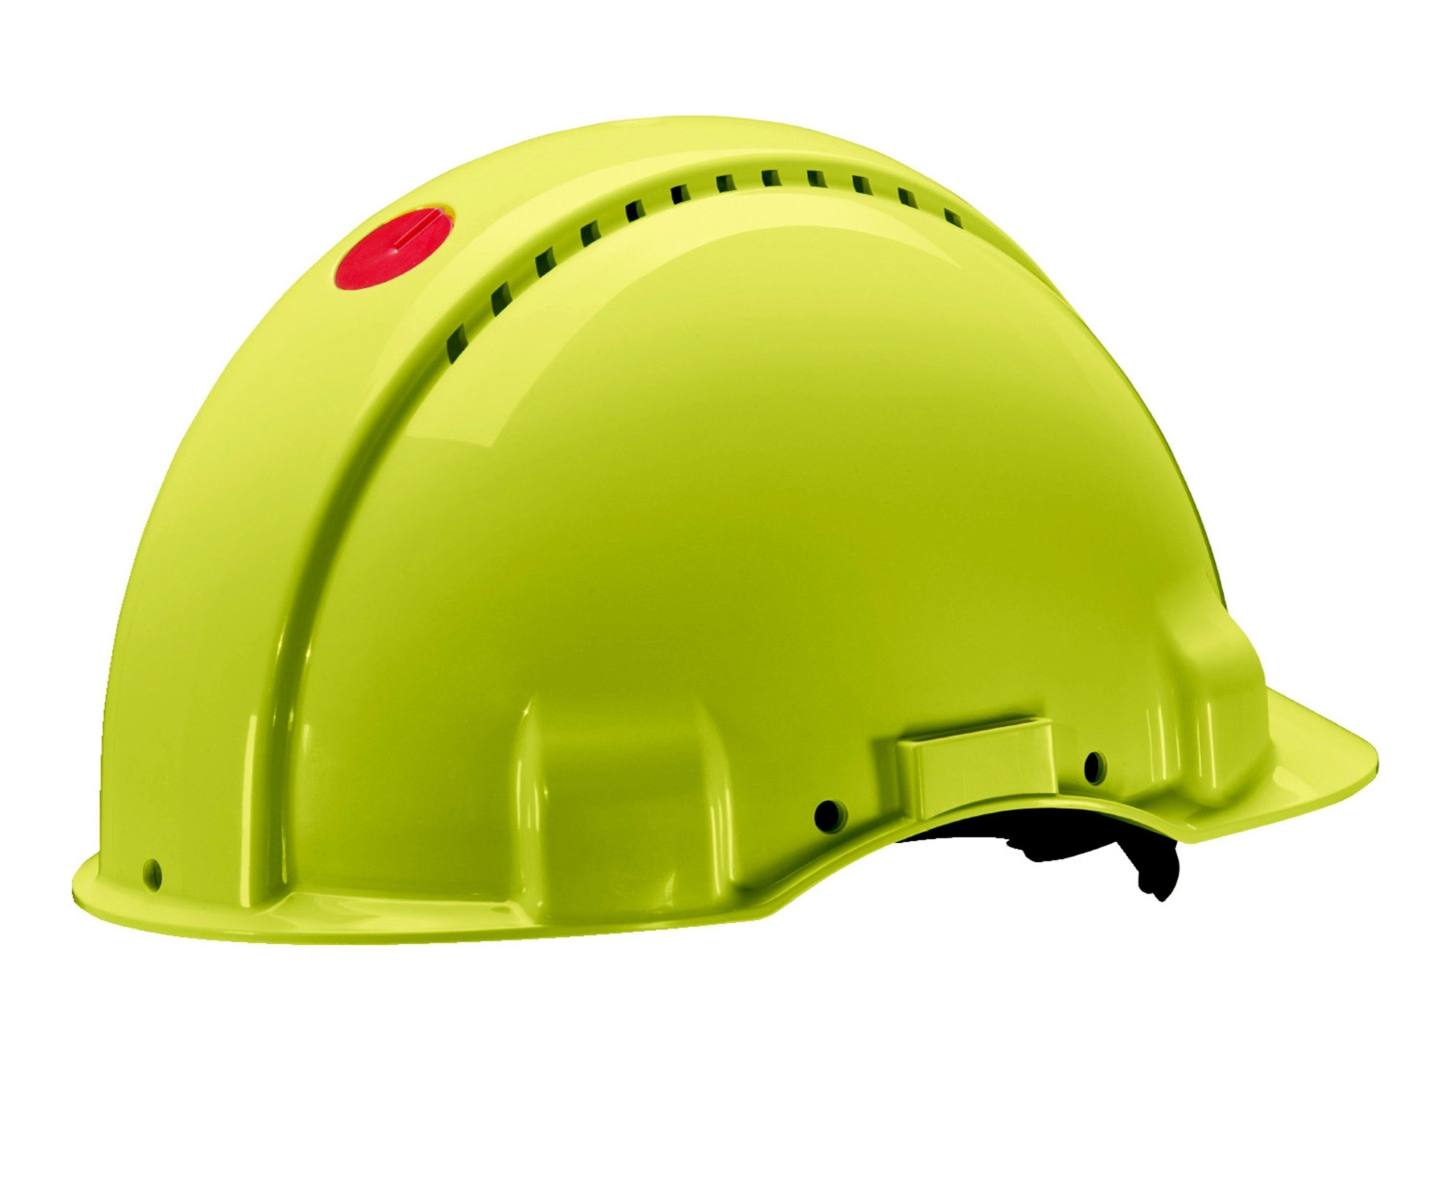 3M Safety helmet, Uvicator, ratchet fastening, non-ventilated, dielectric 1000 V, leather sweatband, warning colour, G3001MUV100V-GB